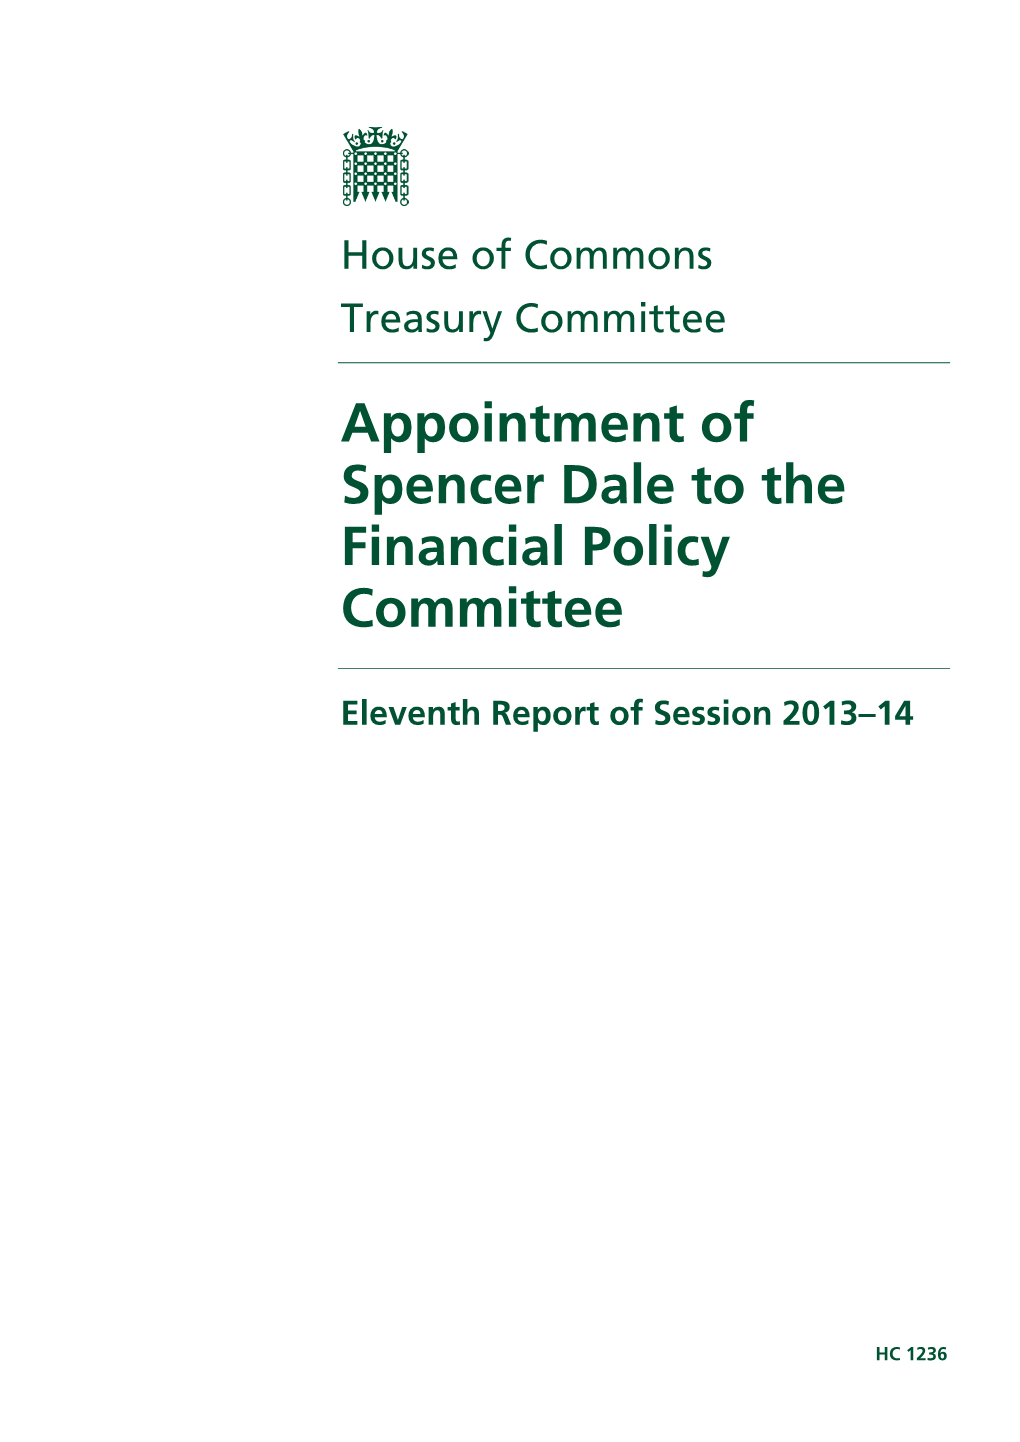 Appointment of Spencer Dale to the Financial Policy Committee